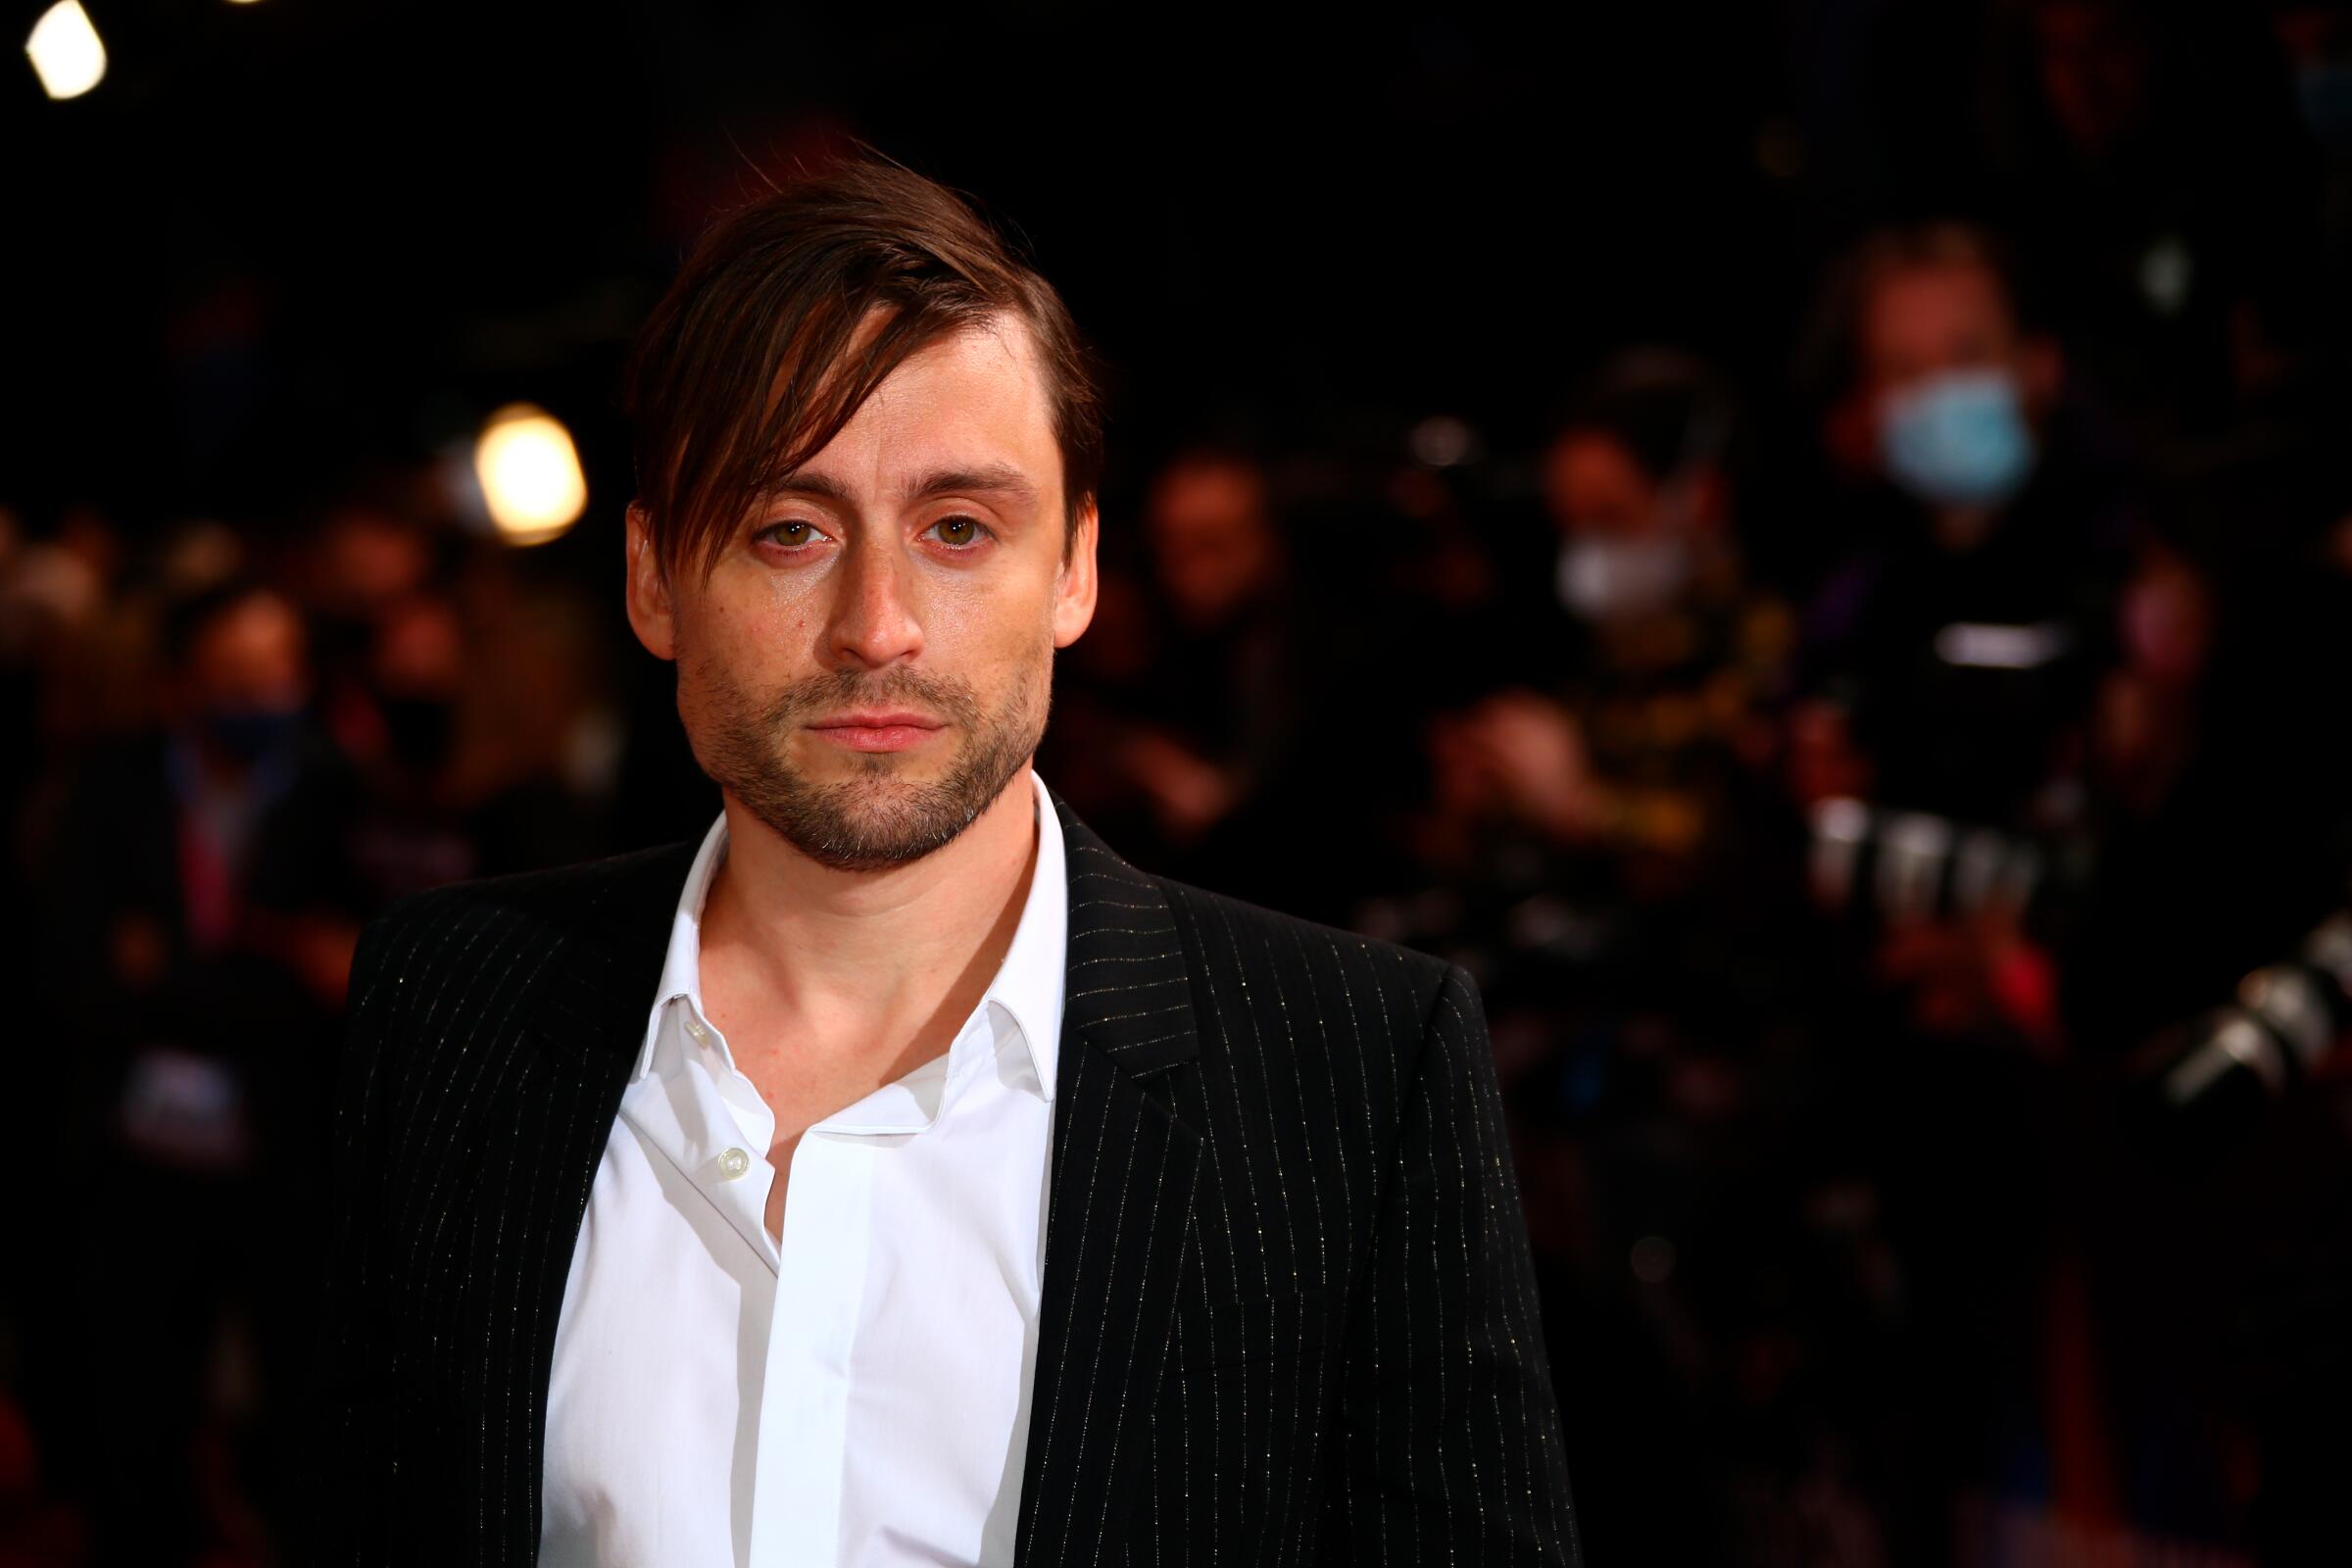 Kieran Culkin poses for photographers upon arrival at the premiere of 'Succession' during the 2021 BFI London Film Festival